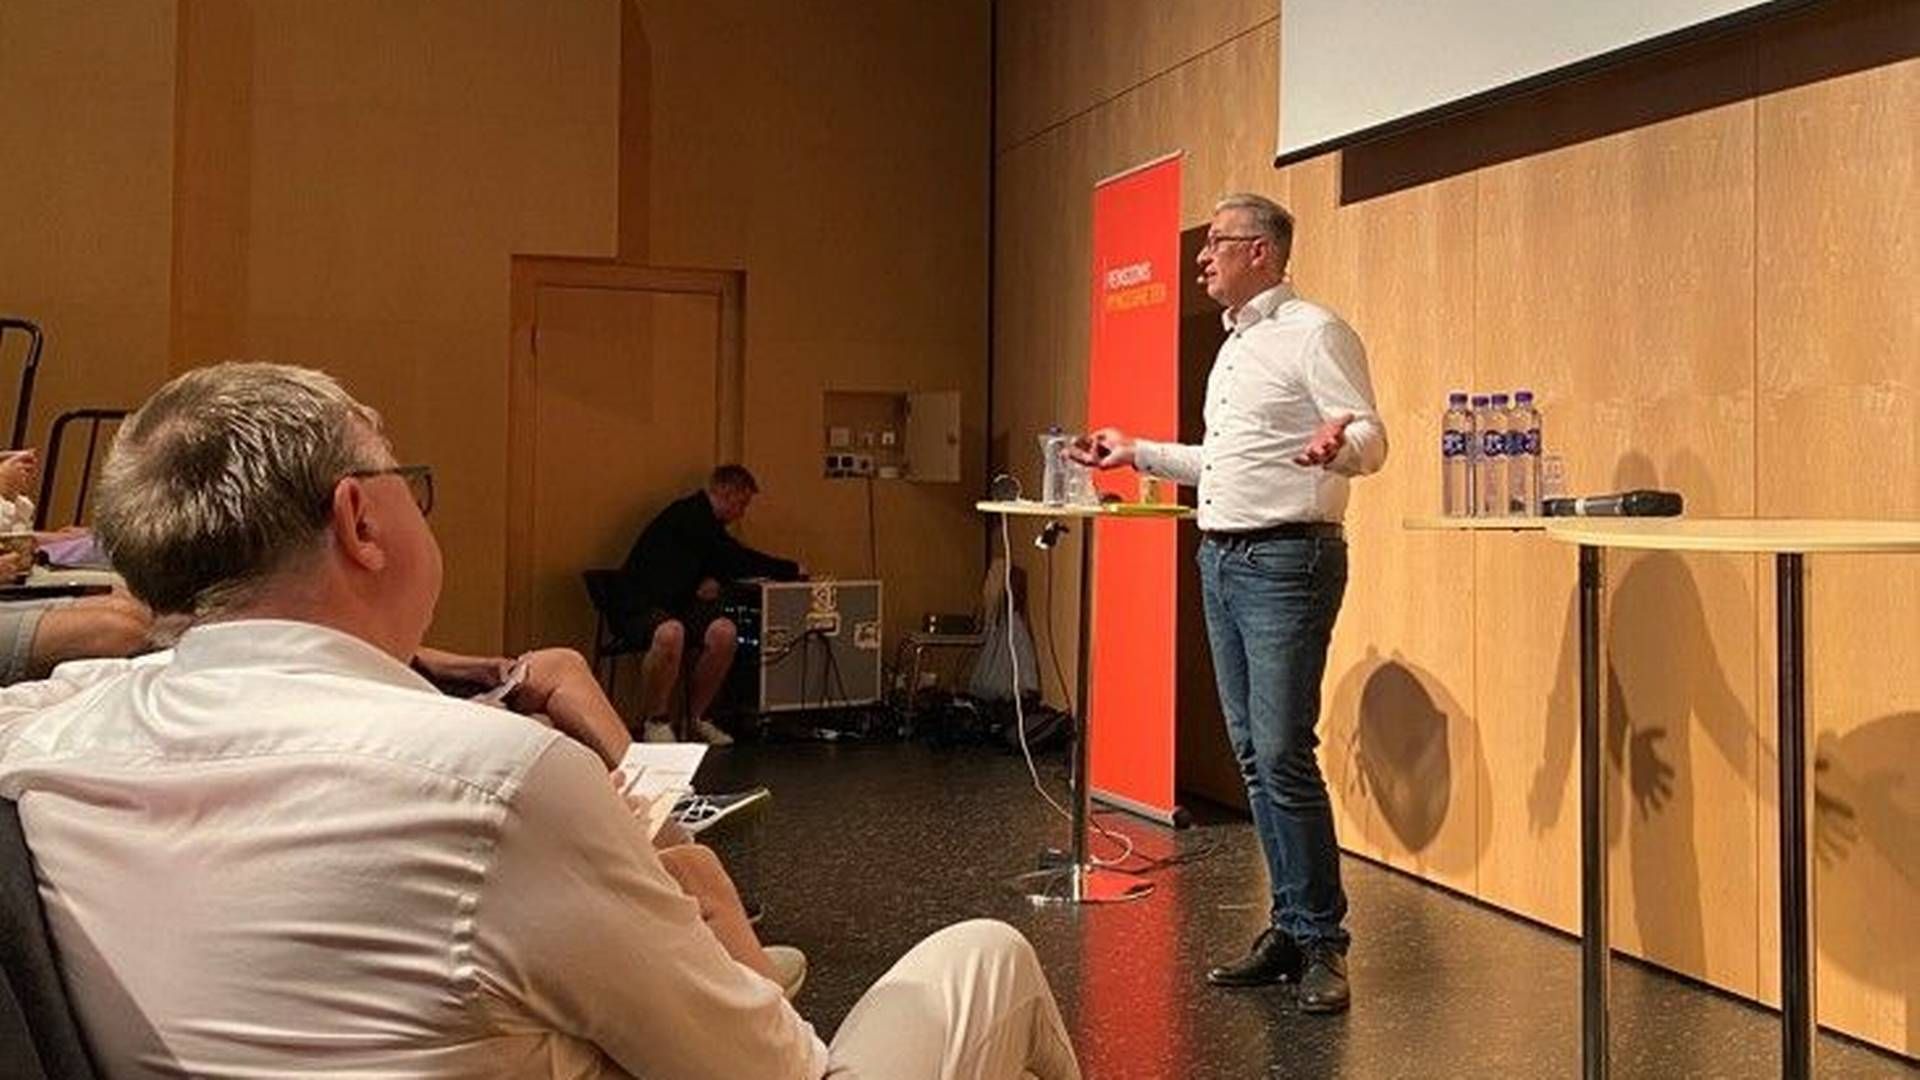 At the Swedish democracy festival, Almedalsveckan, Stefan Lundbergh presented a comparison of the pension systems in five Northern European countries. | Photo: Pensionsmyndigheten / PR